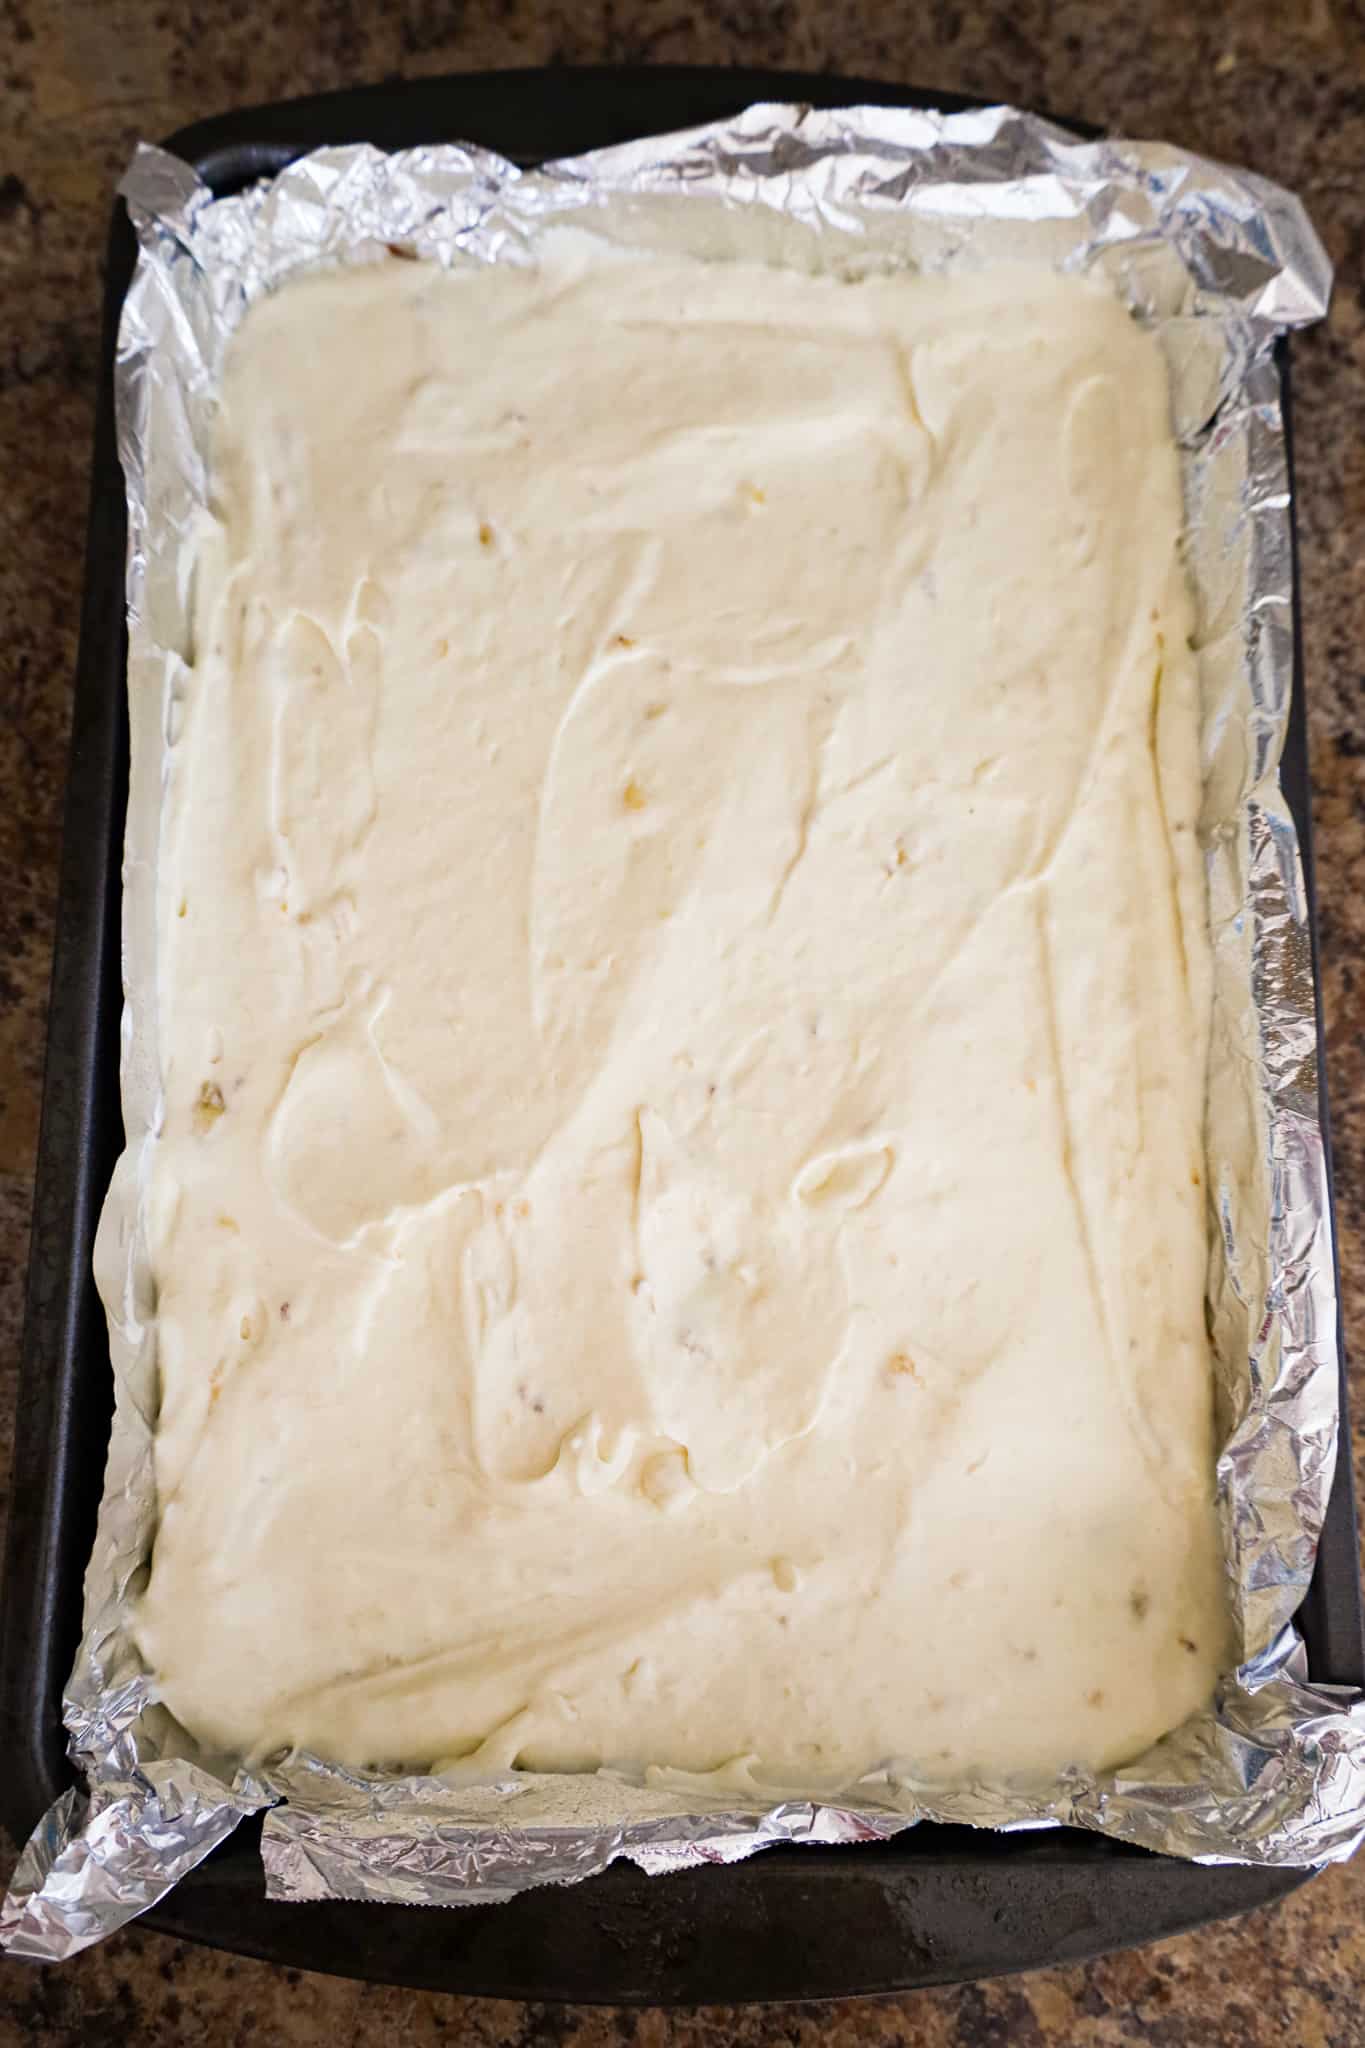 banana pudding mixture spread on top of brownies in a baking pan